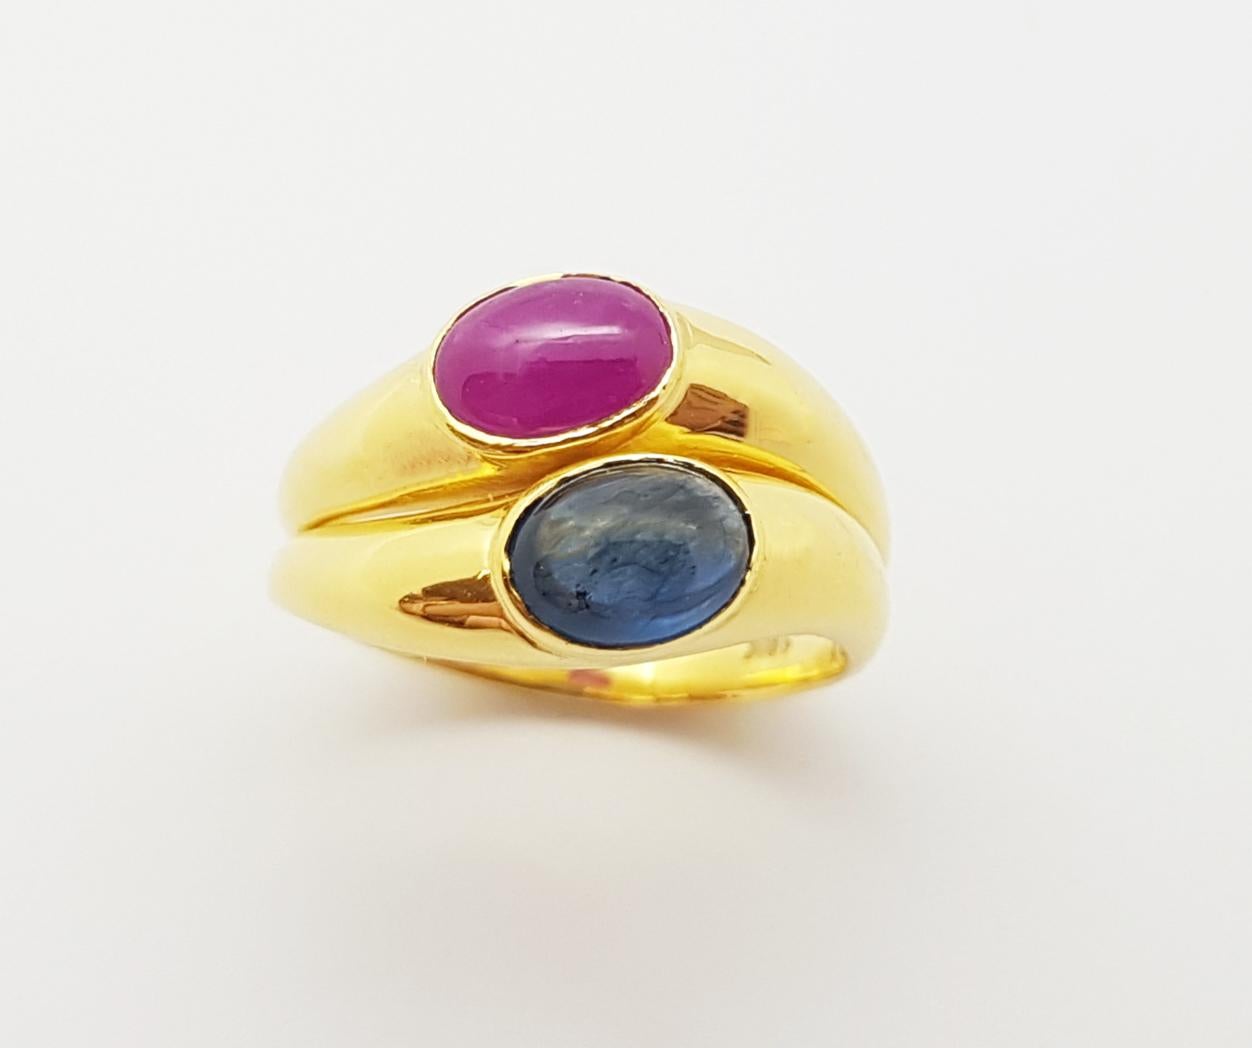 Cabochon Ruby and Cabochon Blue Sapphire Ring Set in 18 Karat Gold Settings For Sale 1